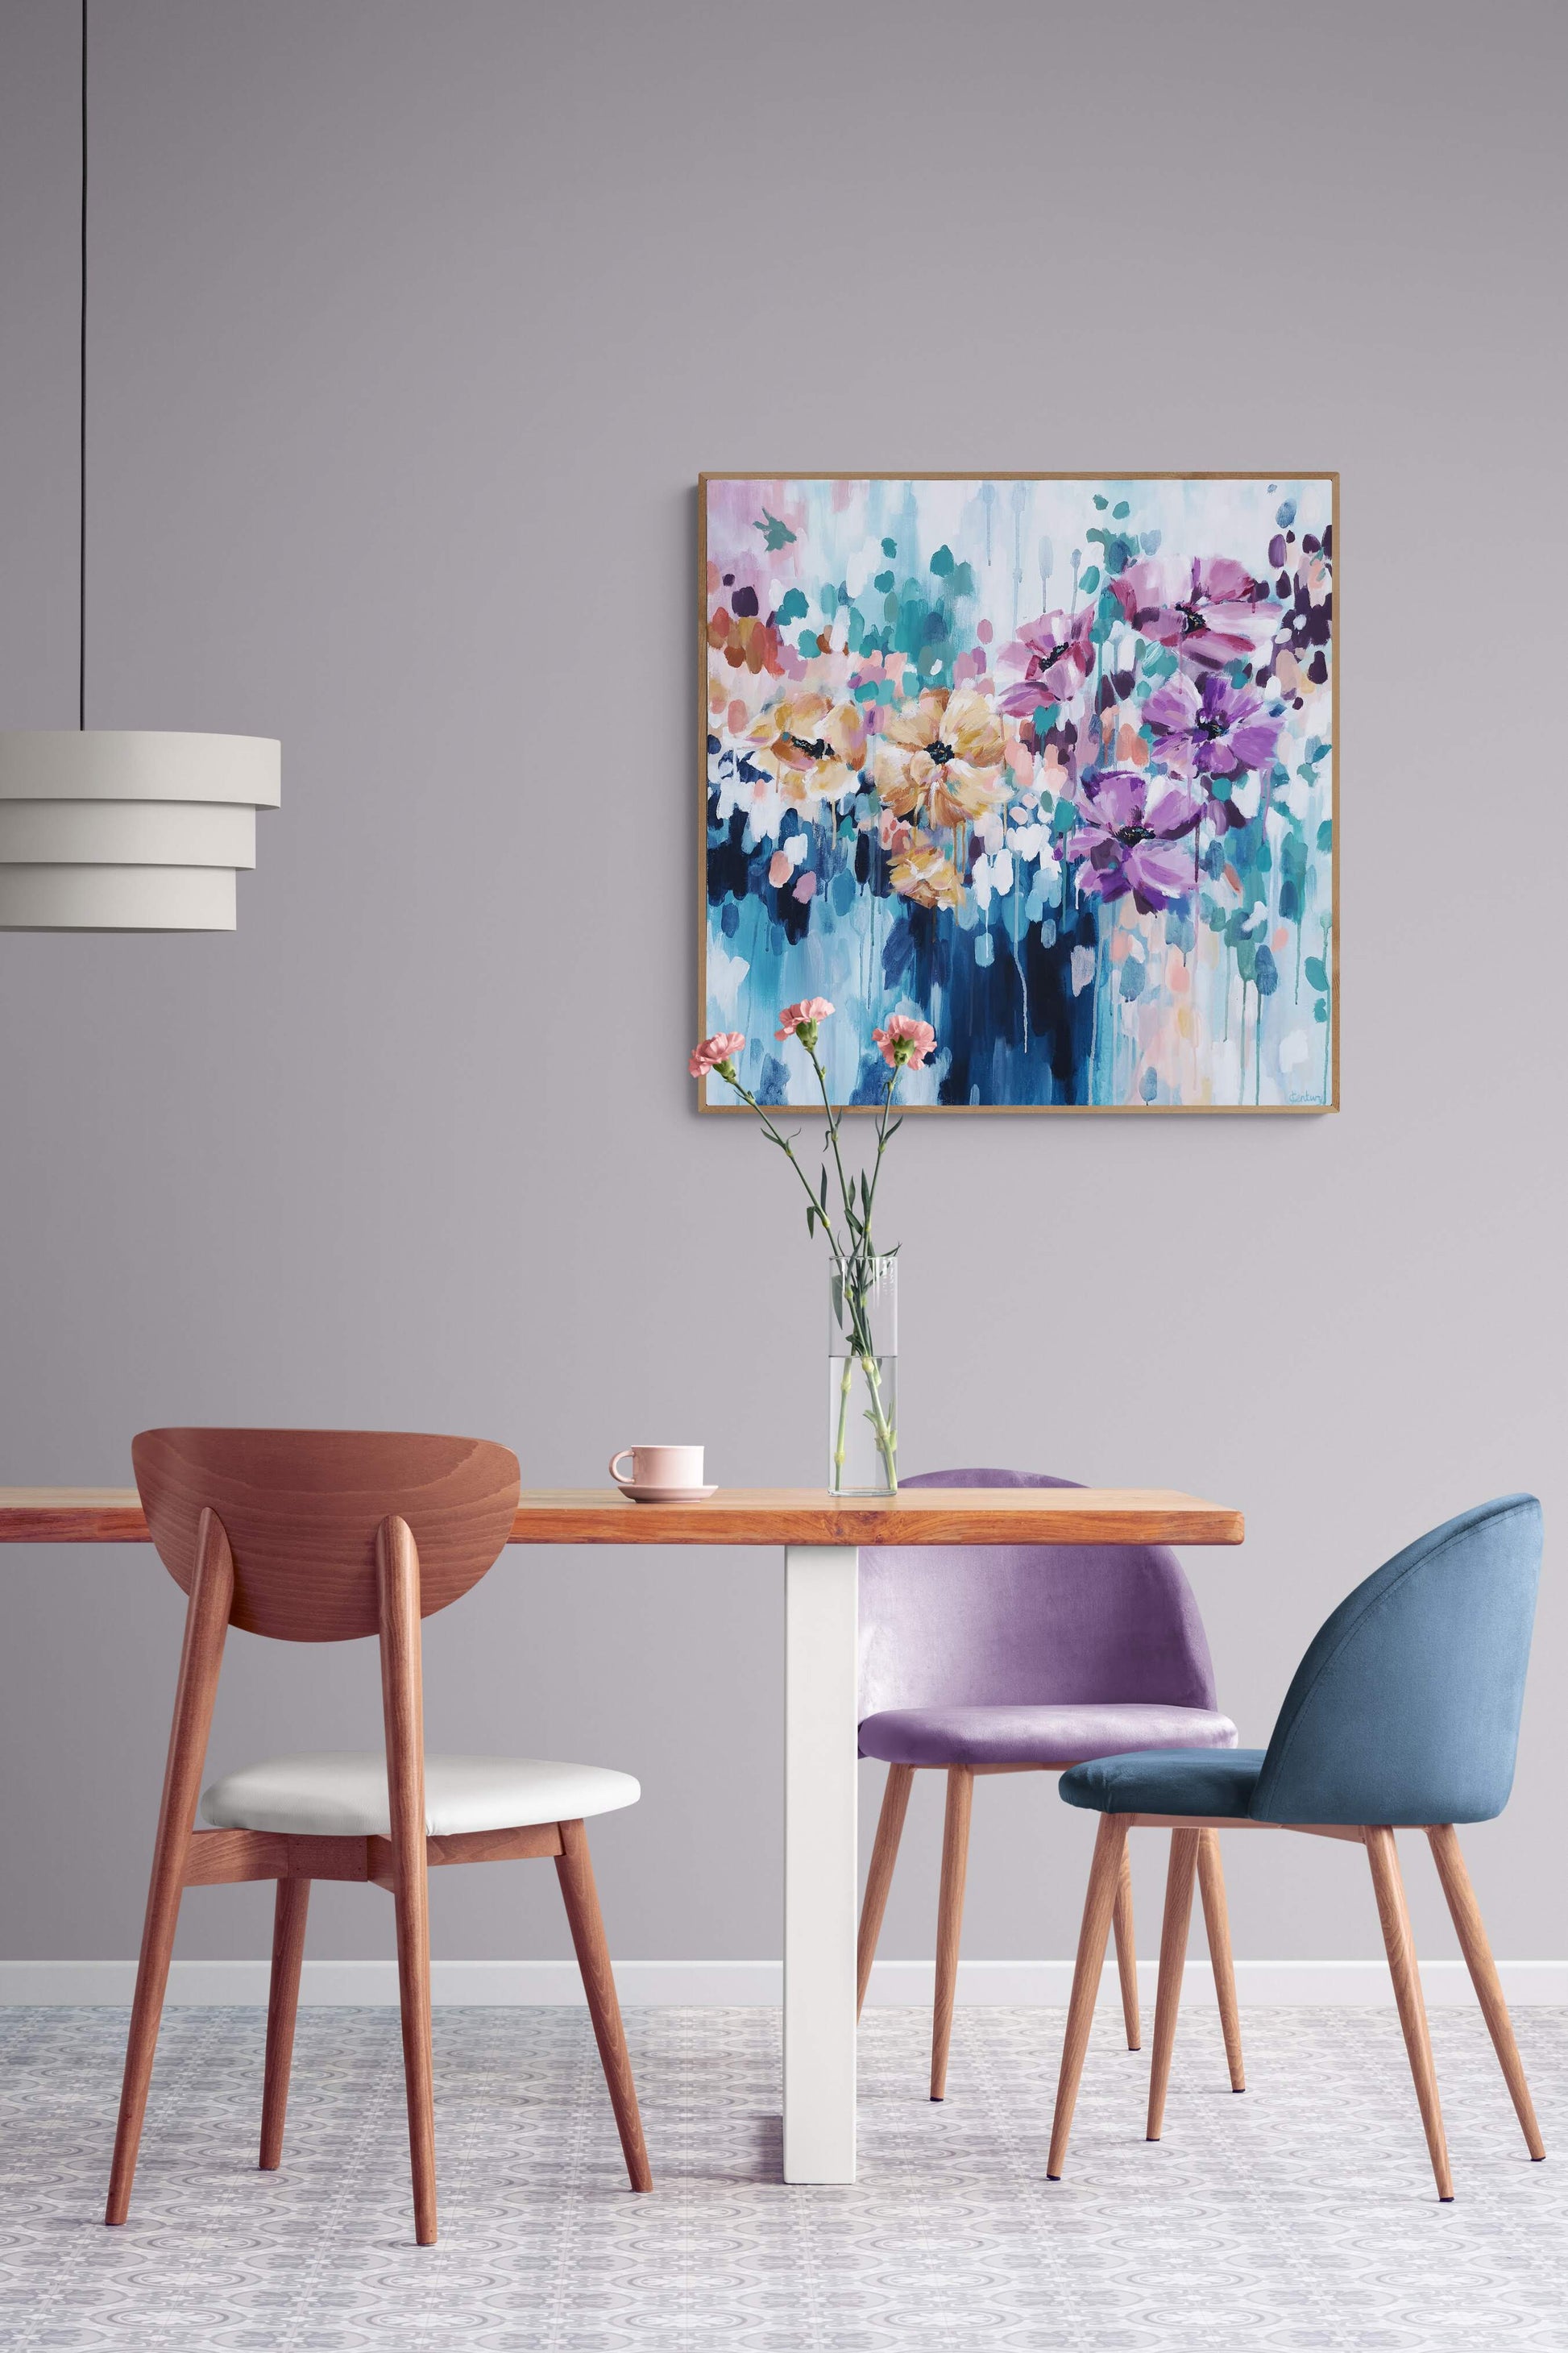 Home decor, interior styling, large canvas wall art original abstract floral painting by Judy Century in wooden dining room